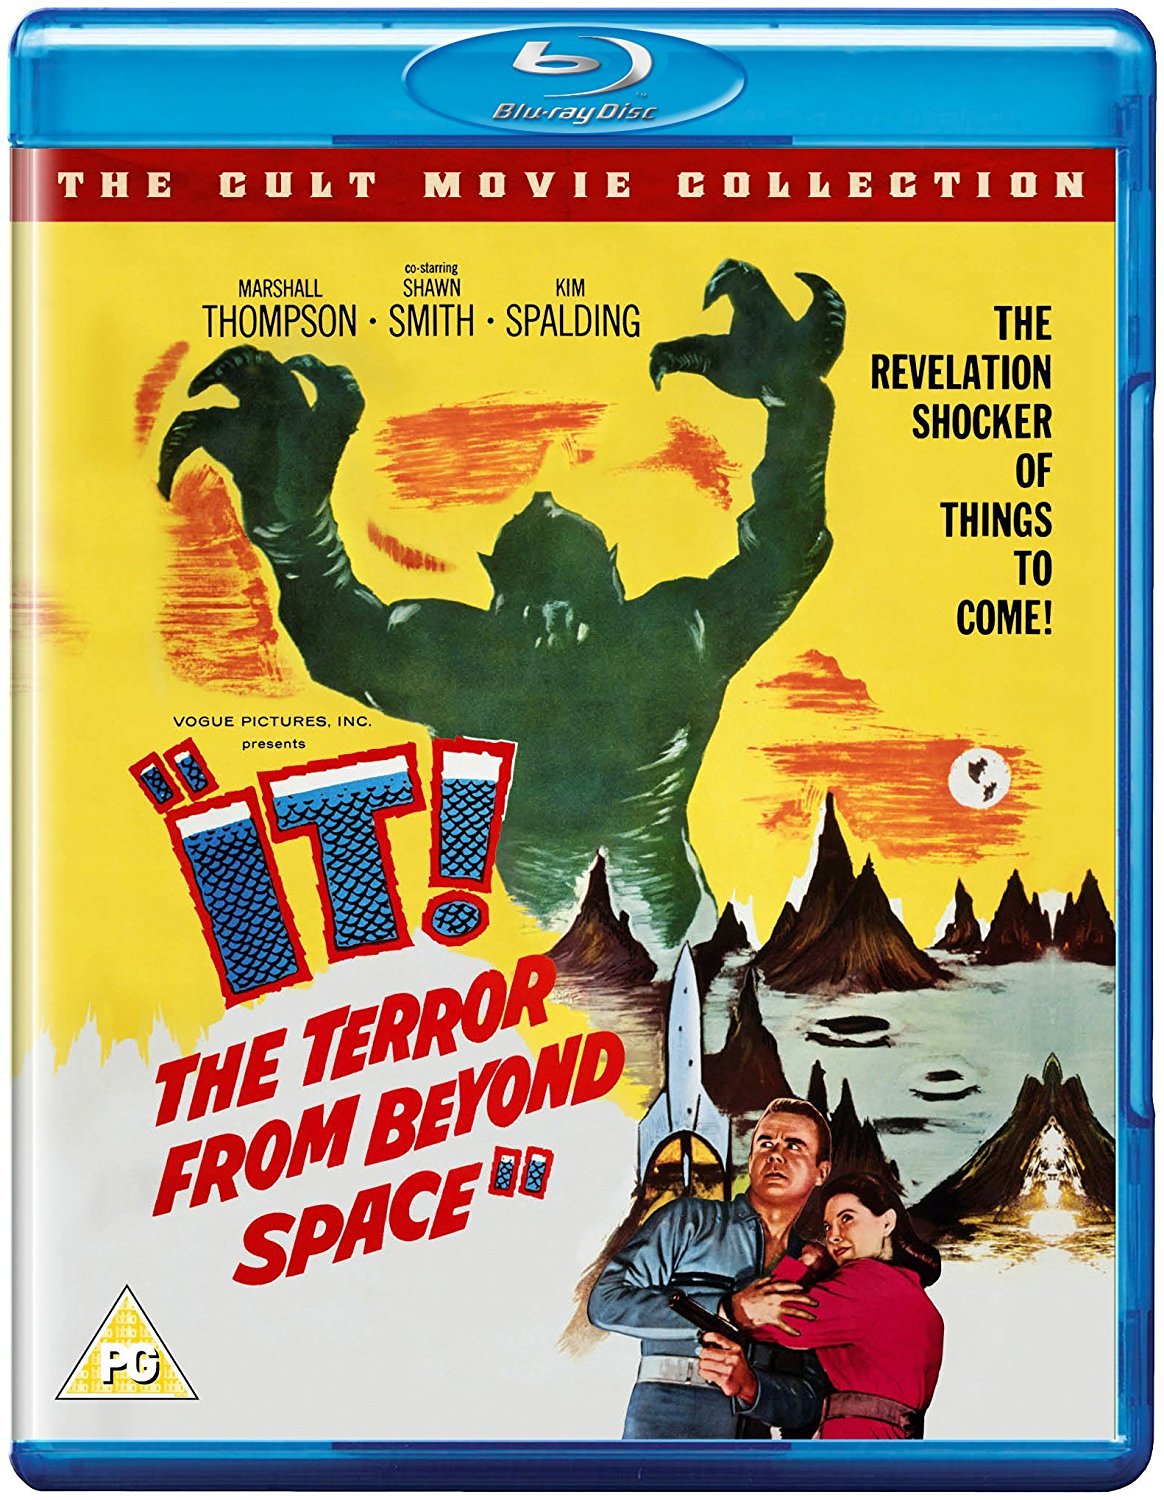 It! The Terror from Beyond Space (1958) starring Marshall Thompson, Shawn Smith, Kim Spalding